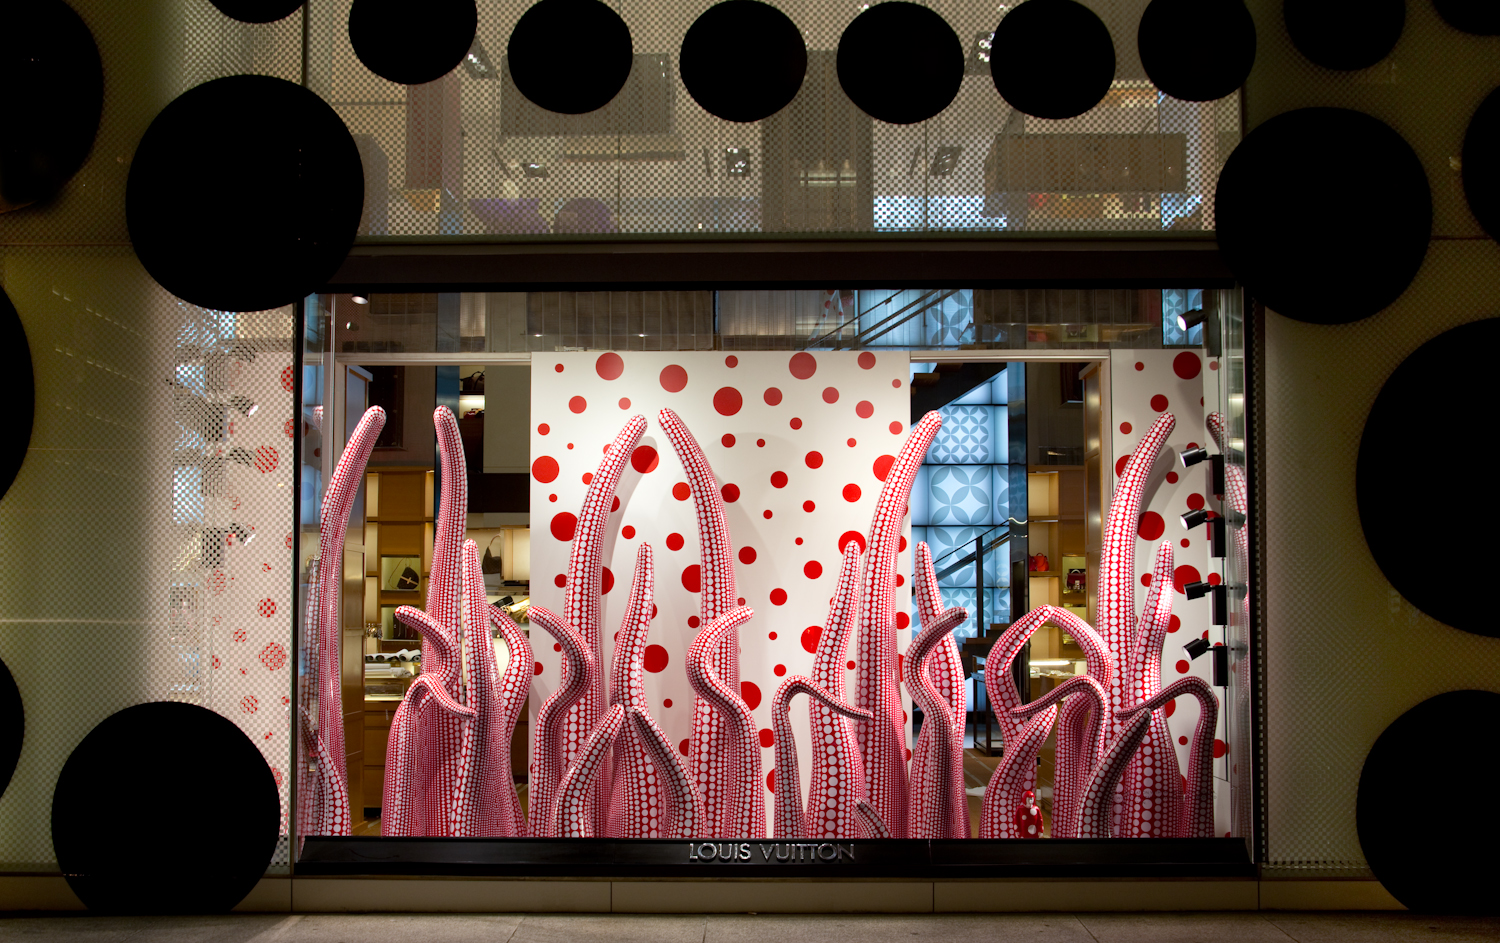 Louis Vuitton on X: Last night in #NYC, #LouisVuitton unveiled the Kusama  inspired windows at the 5th Ave Maison. Can you spot the #Kusama?   / X